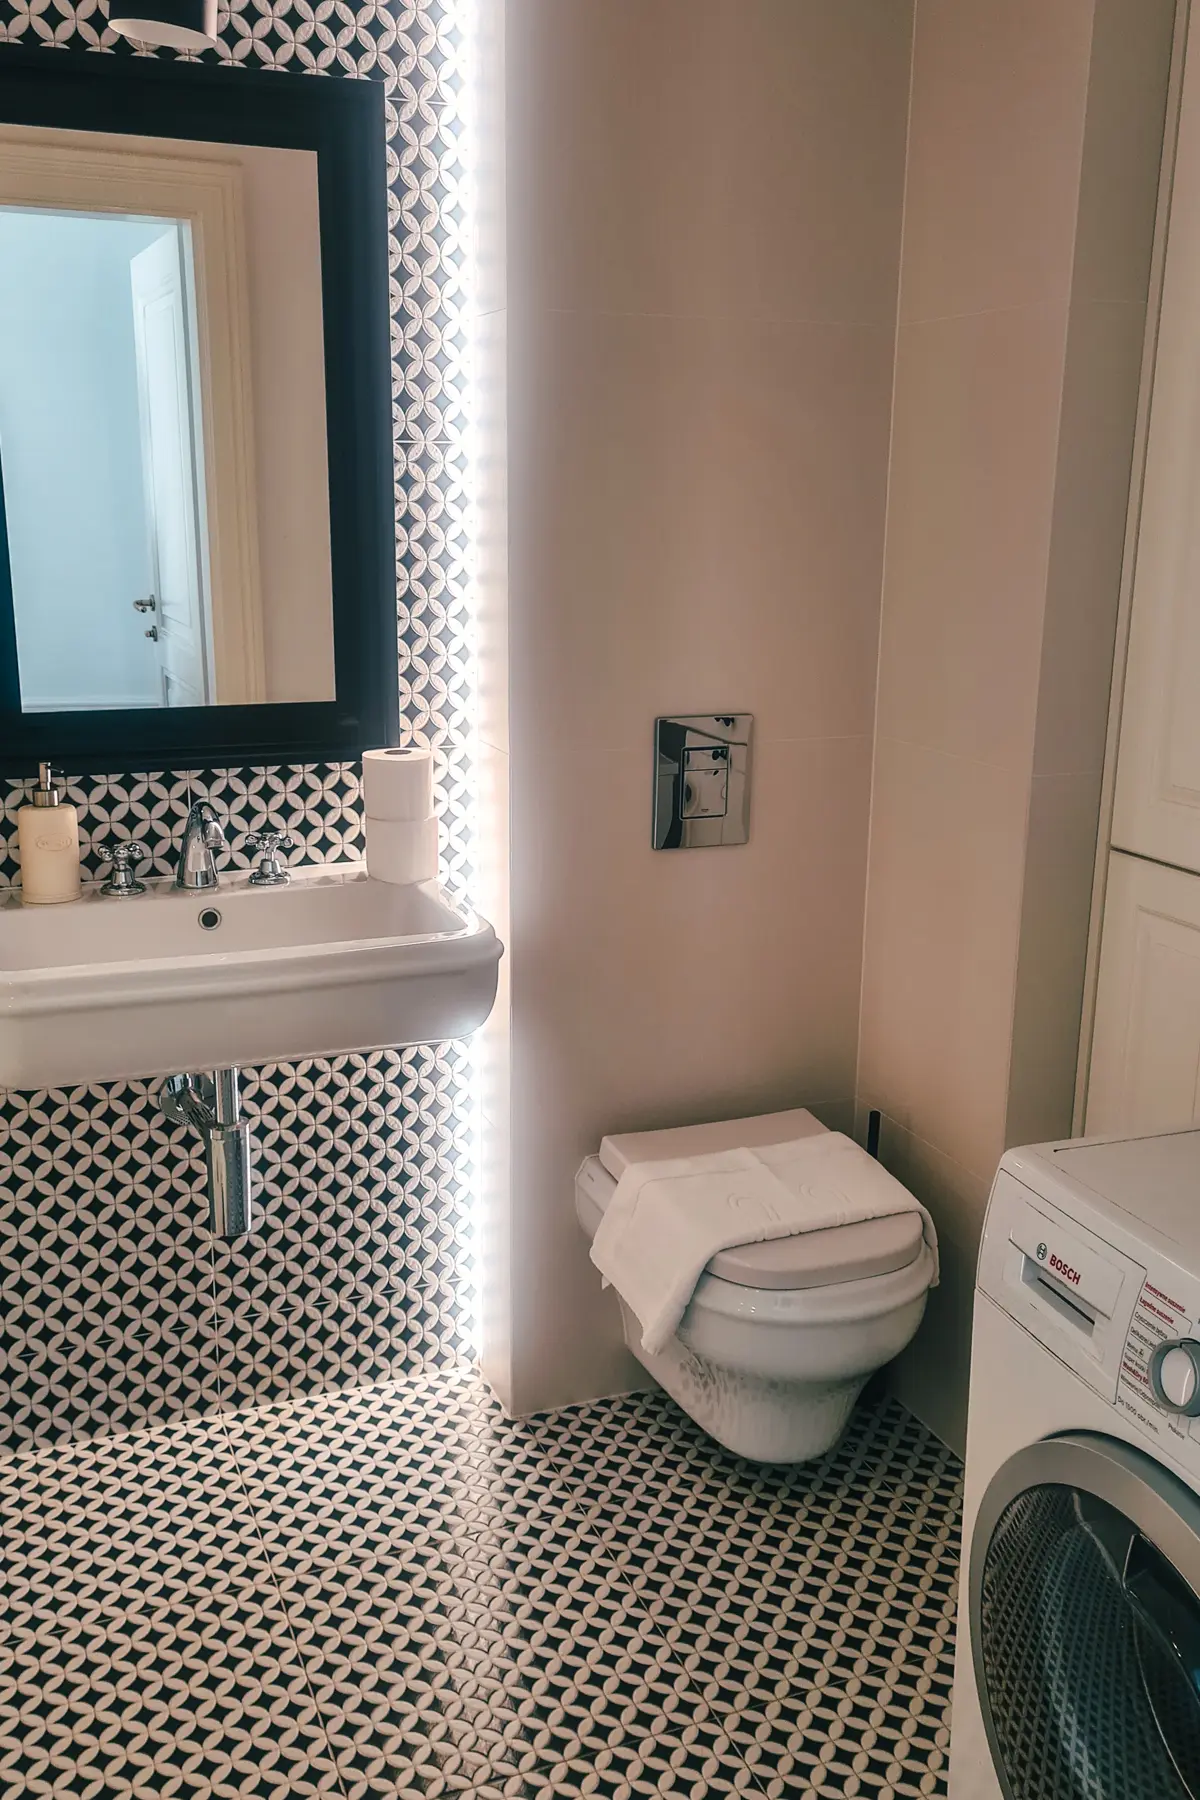 Bathroom with black and white tiled floors, black mirror, large ceramic sink and a washing machine, one of the best apartments to rent in Kazimierz Krakow.